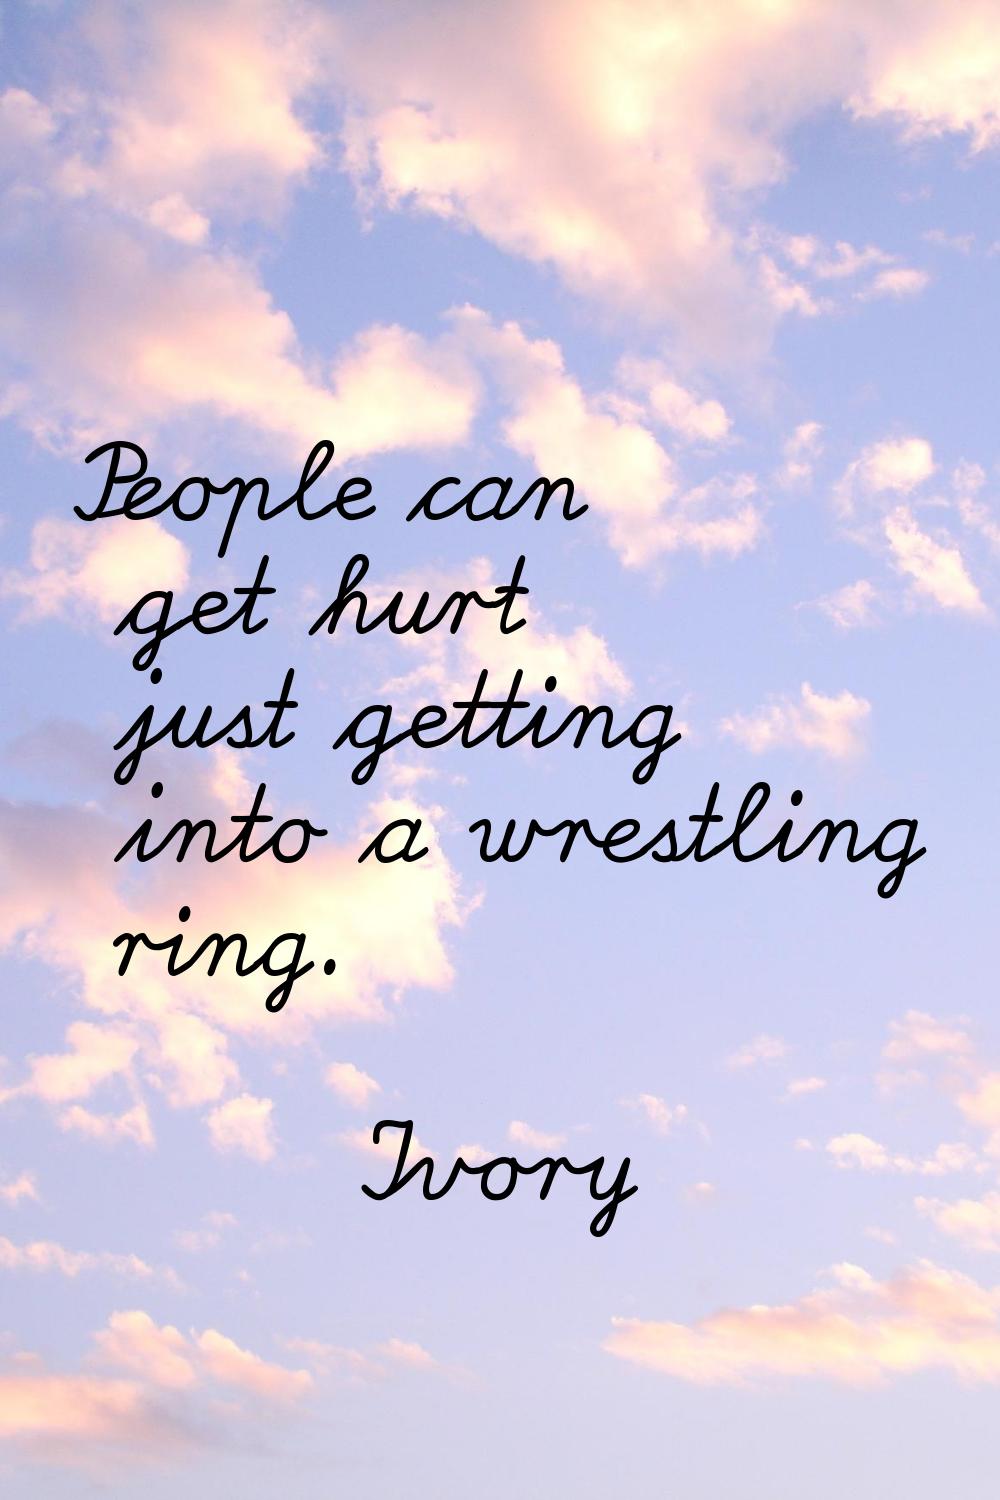 People can get hurt just getting into a wrestling ring.